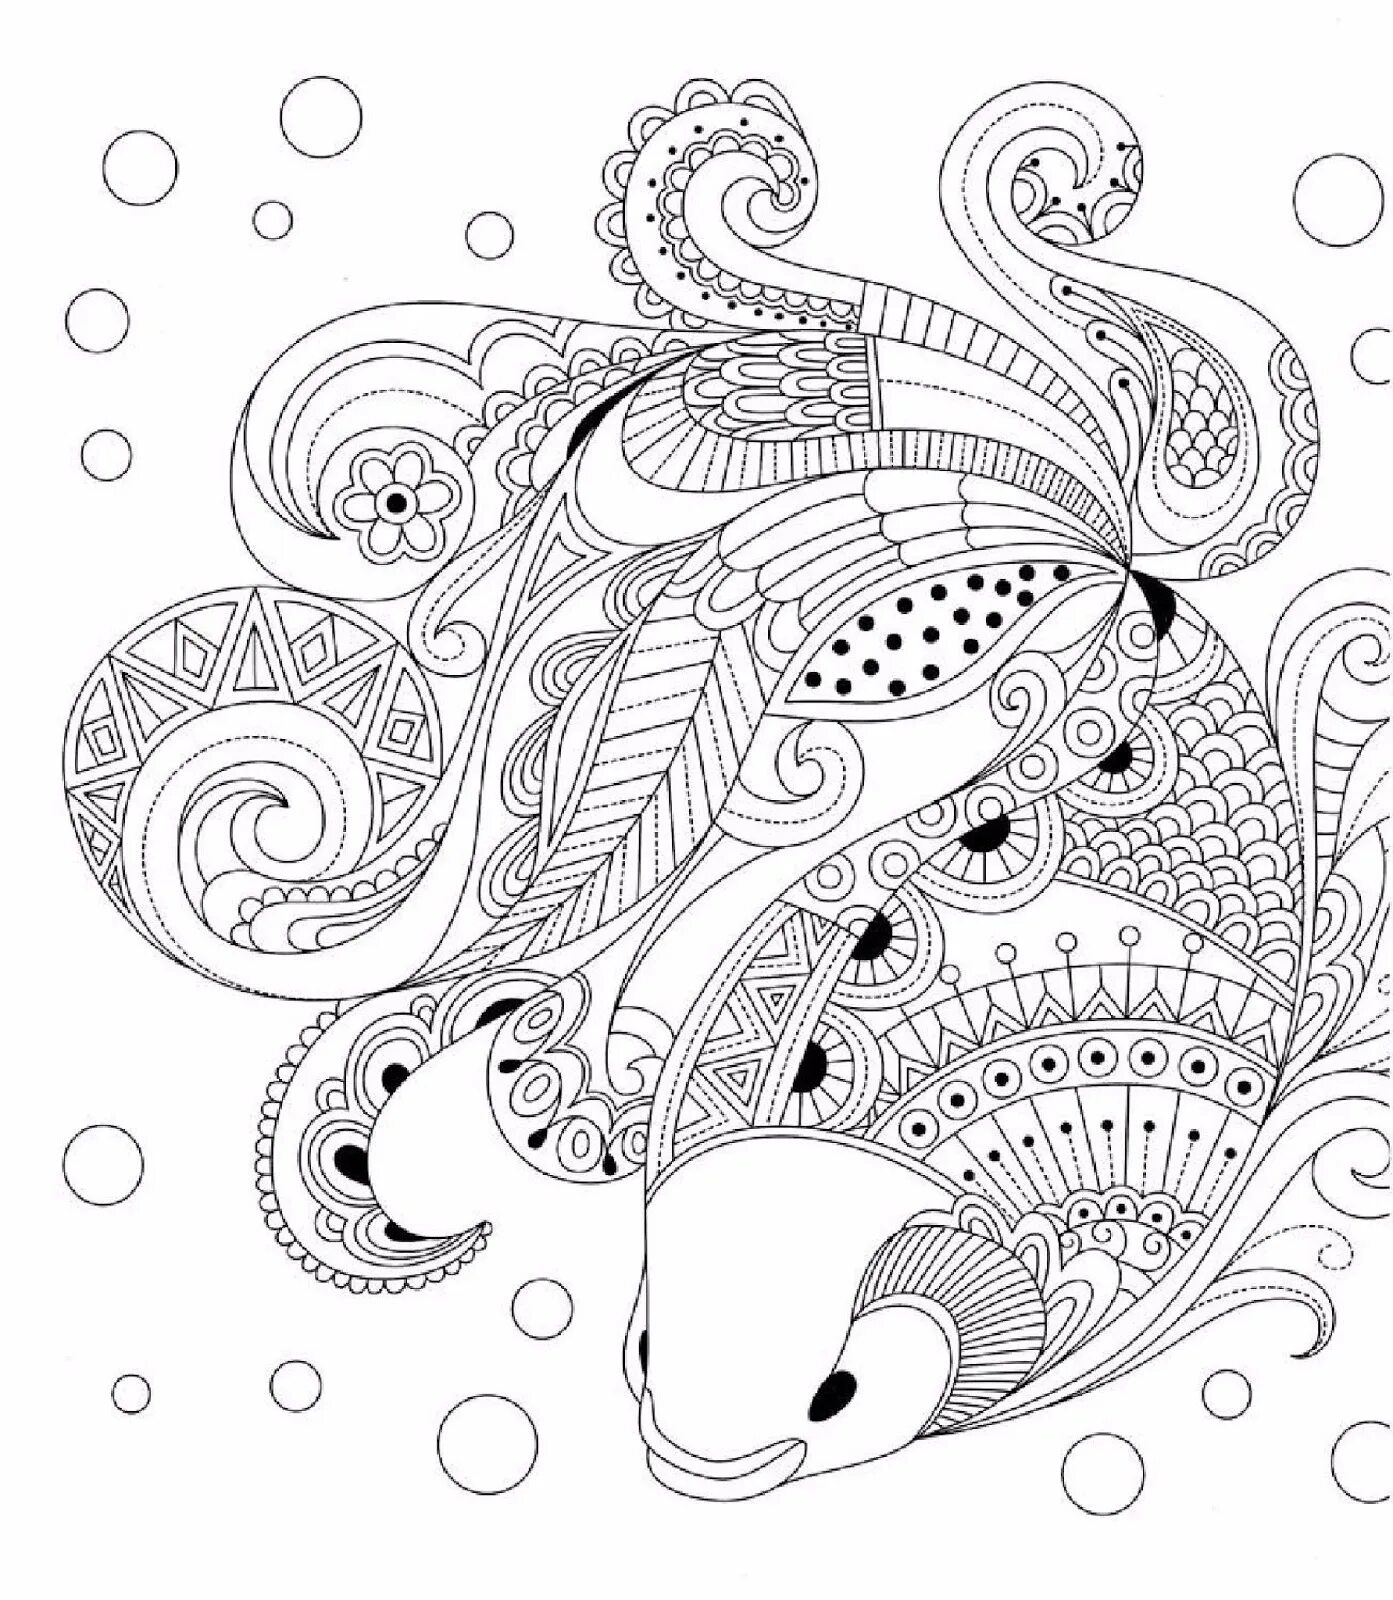 Elegant relaxation coloring book